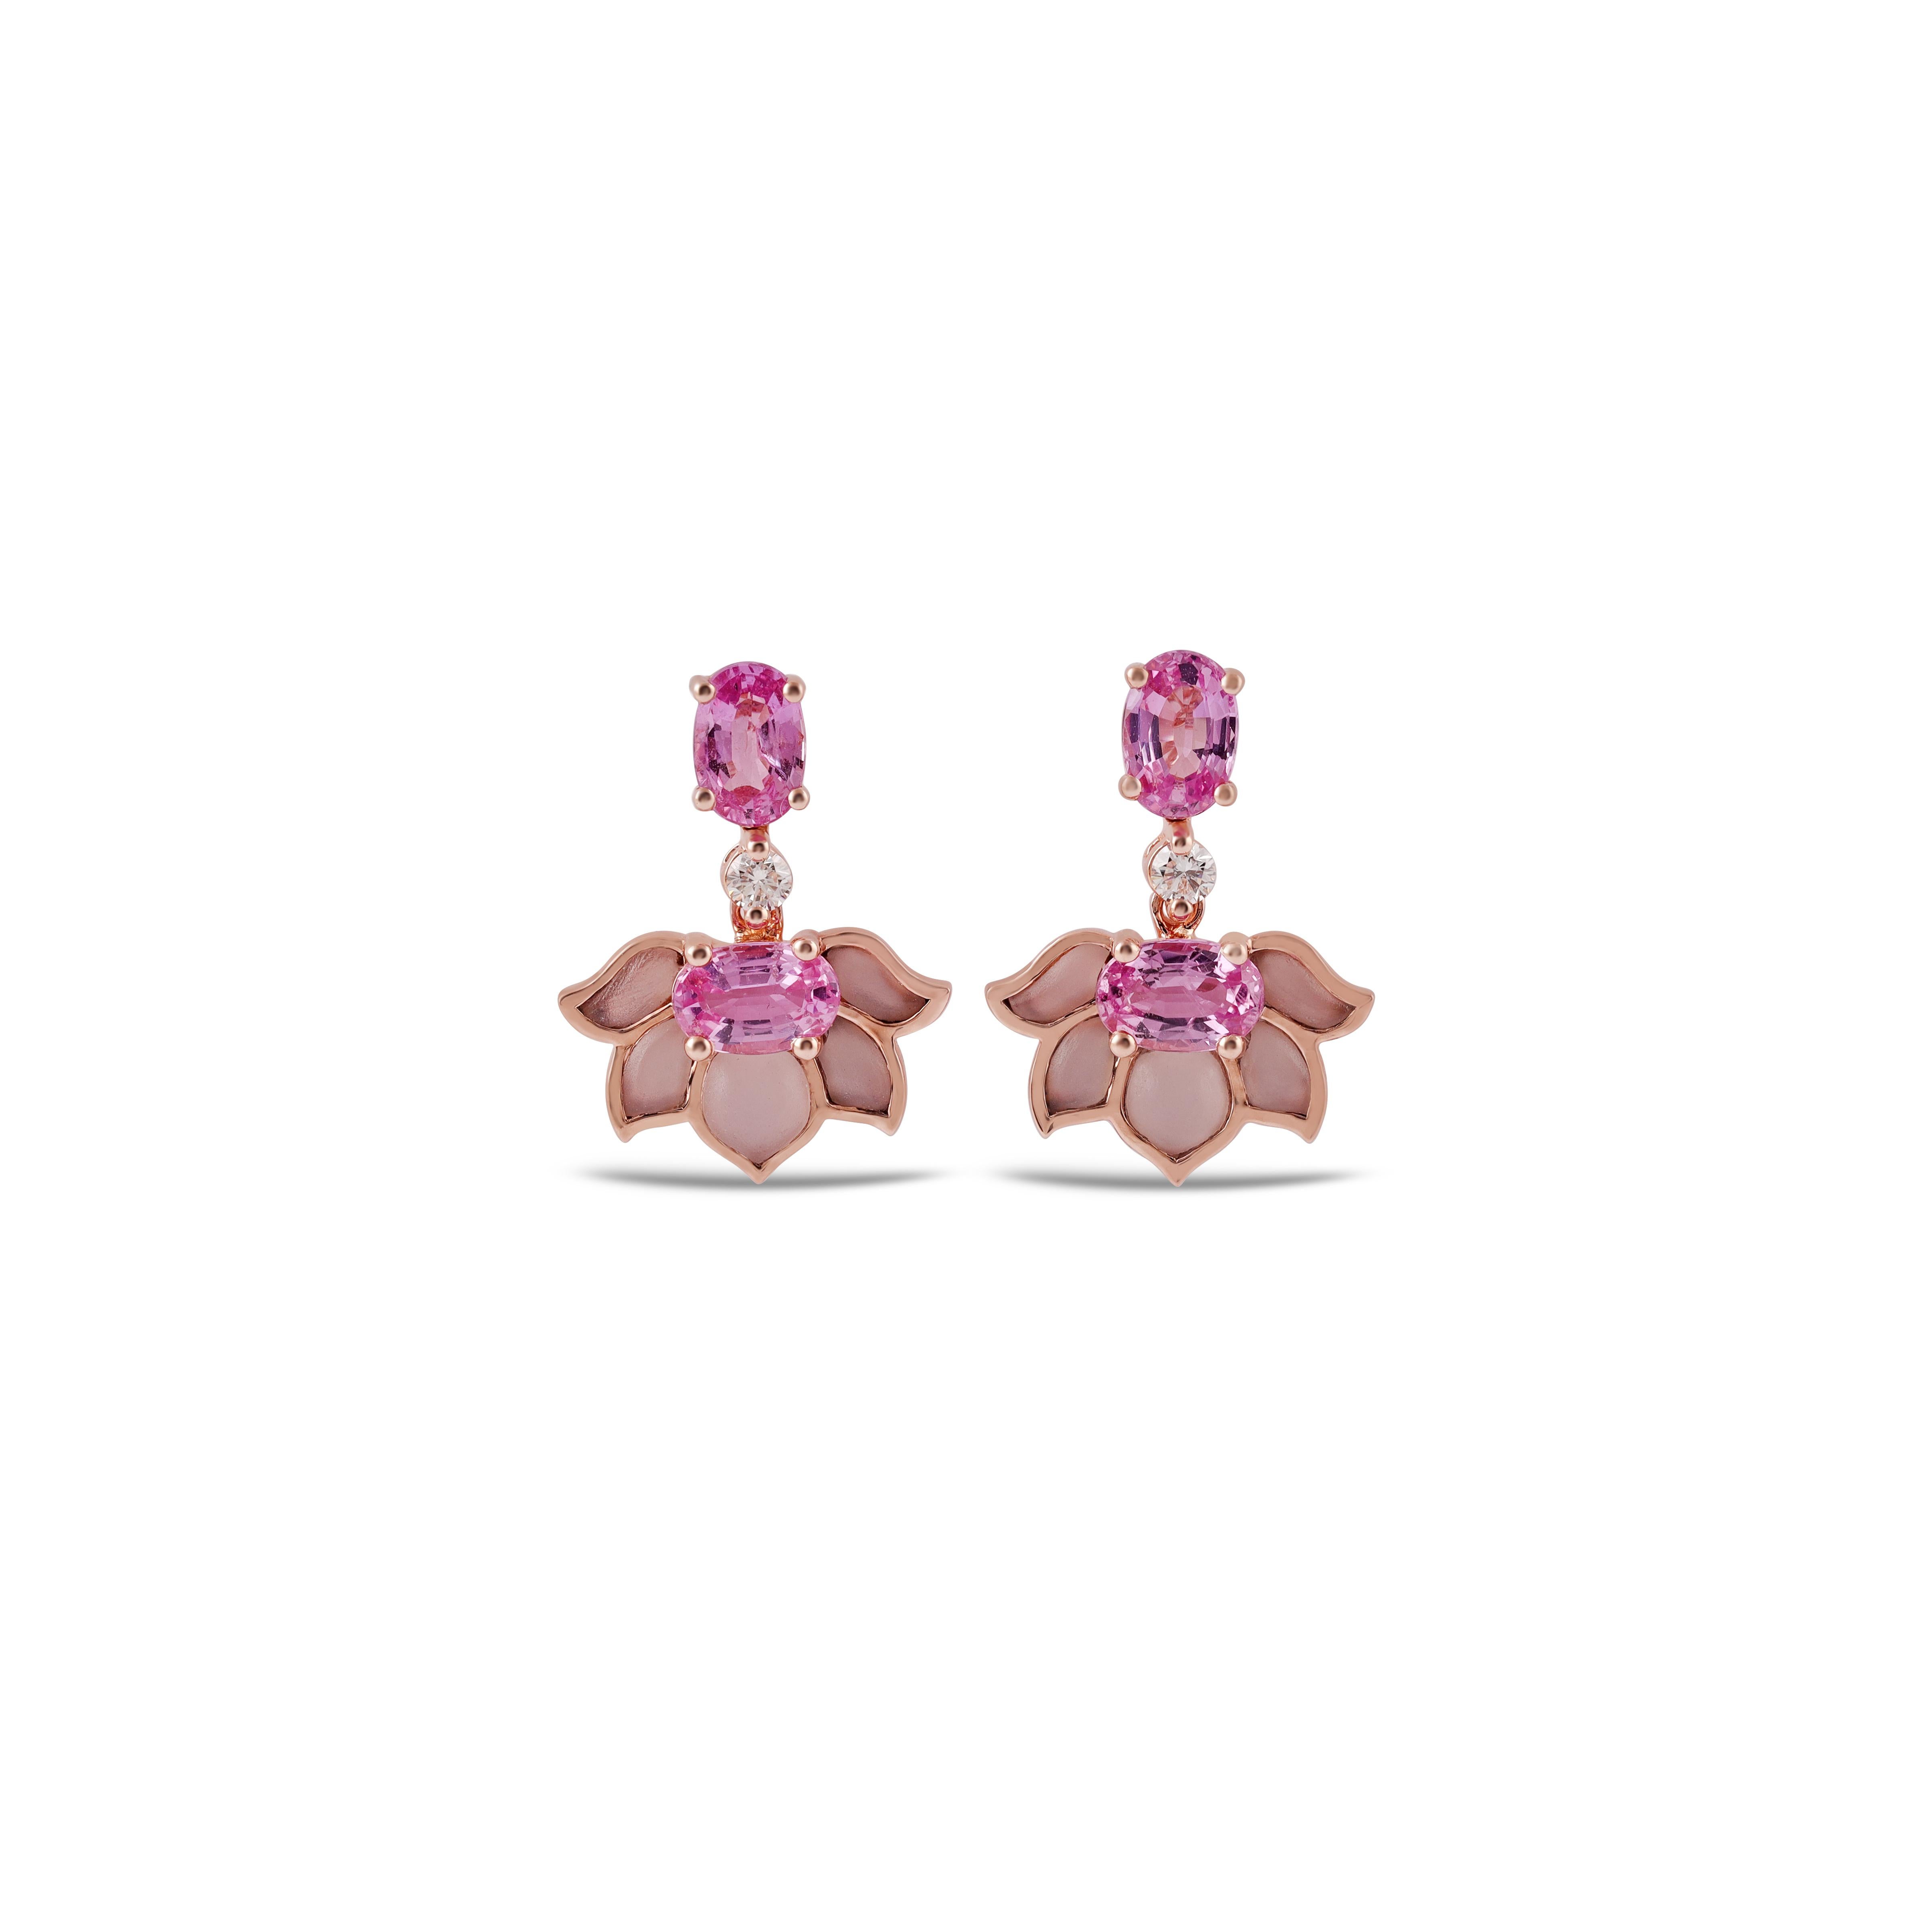 Oval Cut 2.42 cts Pink Sapphire, Rose quartz & Round Diamonds Earrings in 18k Rose Gold For Sale